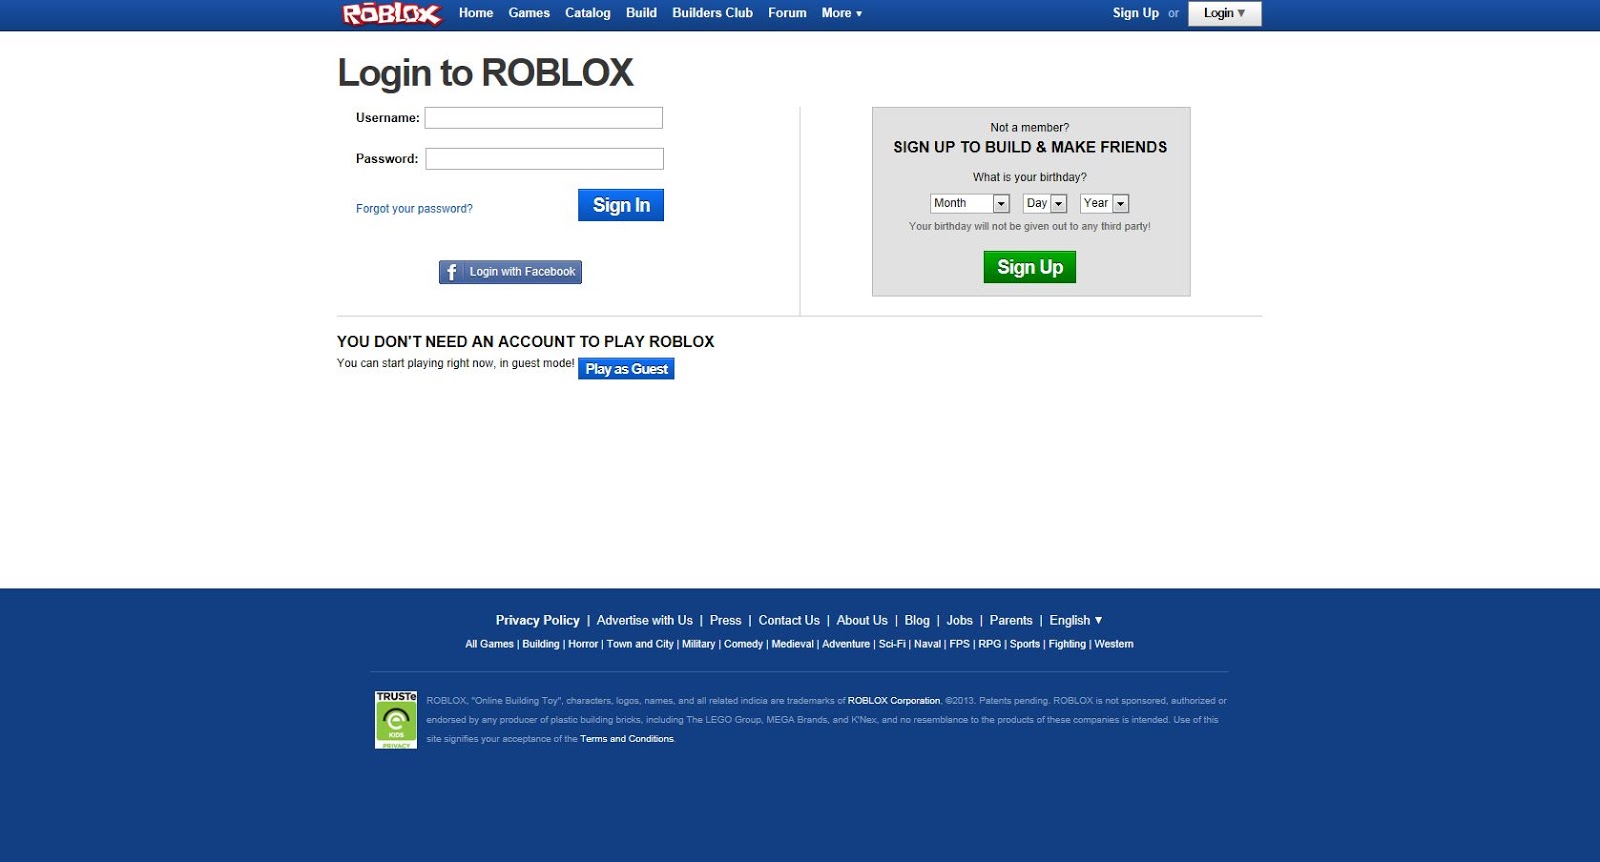 Unofficial Roblox Roblox Blue Panel Update On Website - roblox games and login